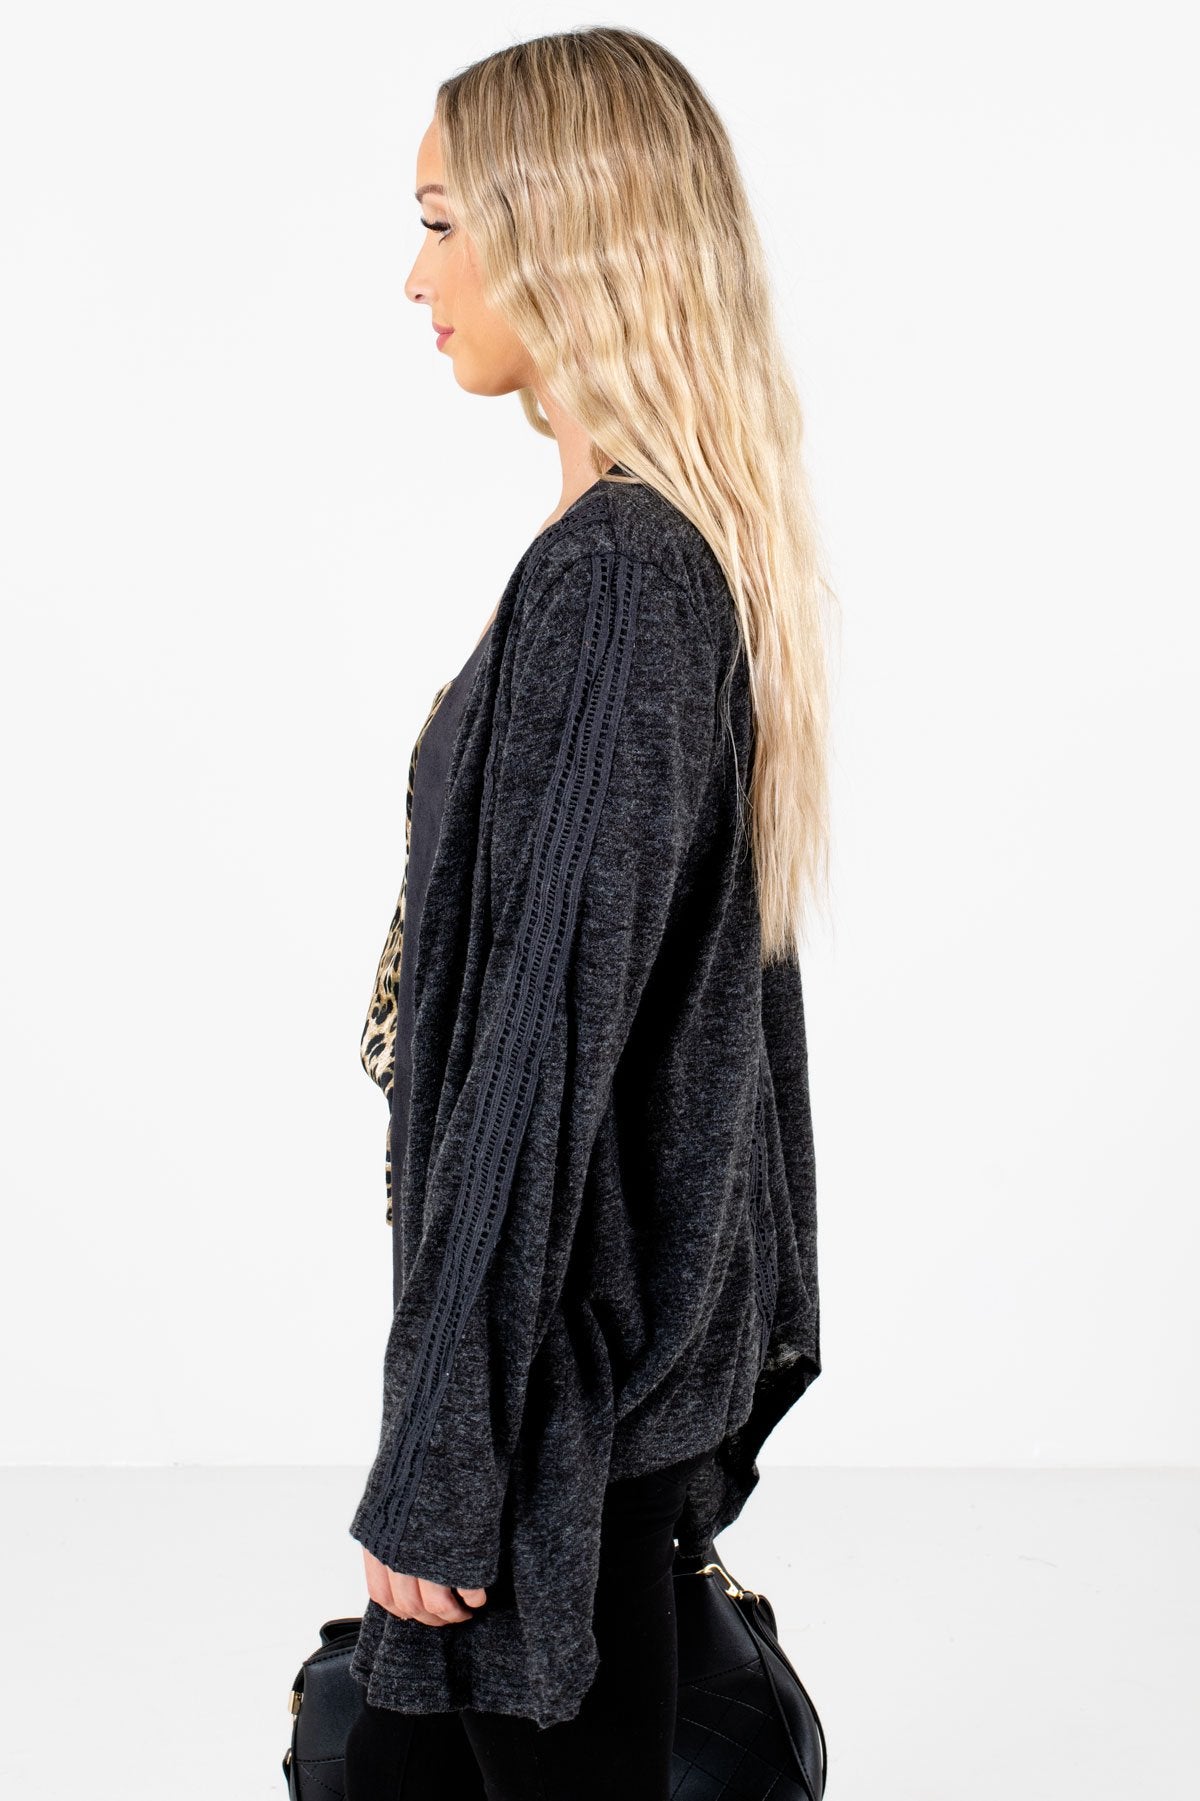 Charcoal Gray Warm and Cozy Boutique Cardigans for Women